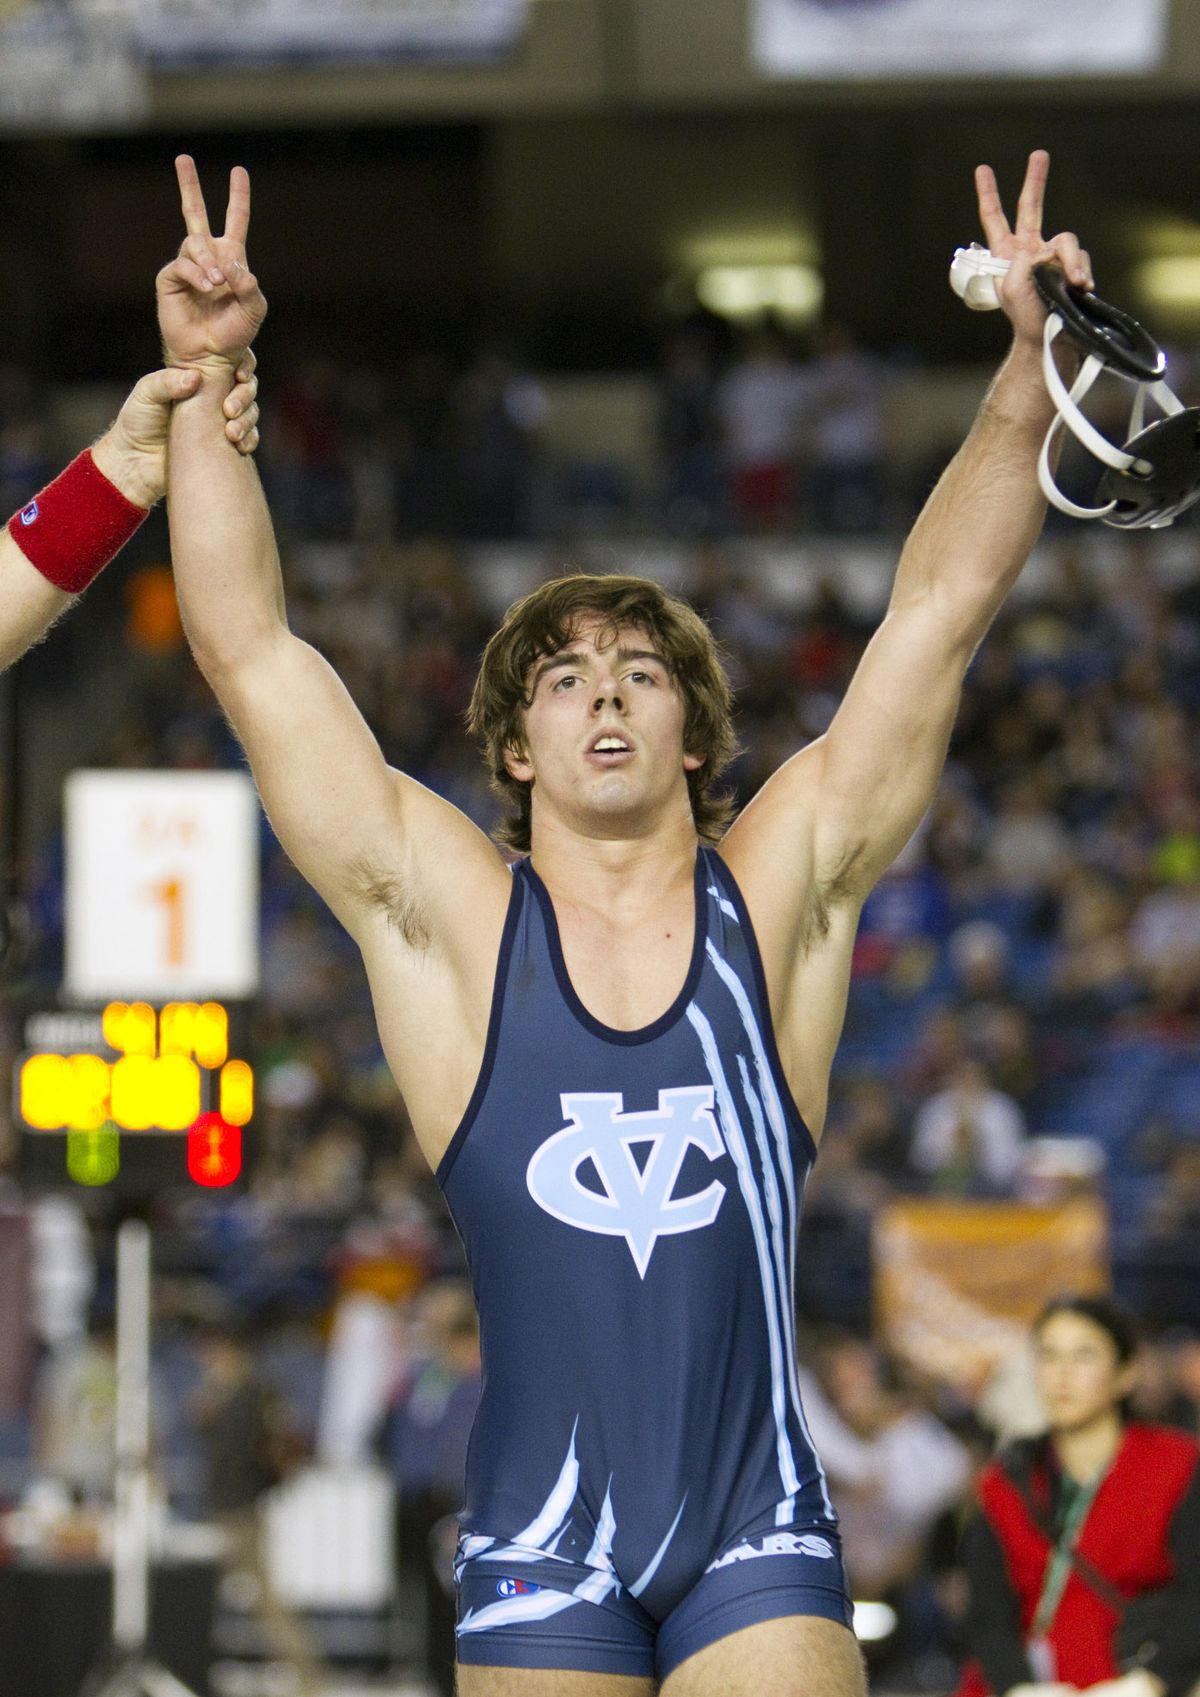 CV 145-pounder Colton Orrino notes his back-to-back state titles. (Patrick Hagerty photos)